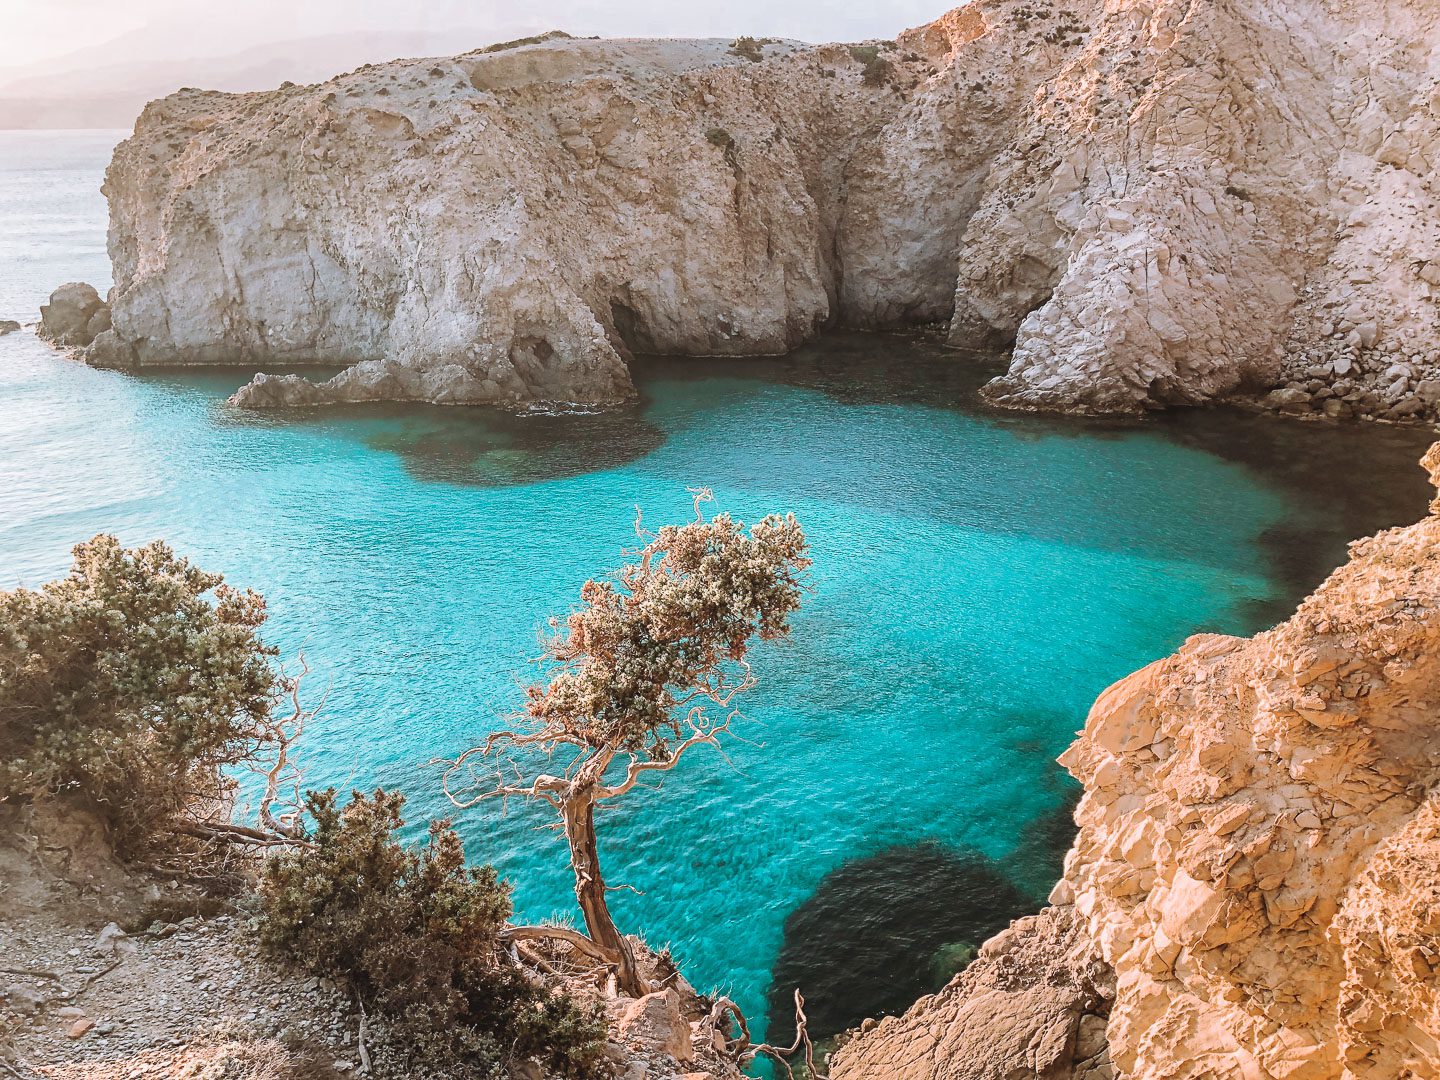 Looking down towards the bright turquoise waters of Tsigrado Beach surrounded by cliffs and cypress trees on Milos Island in Greece.